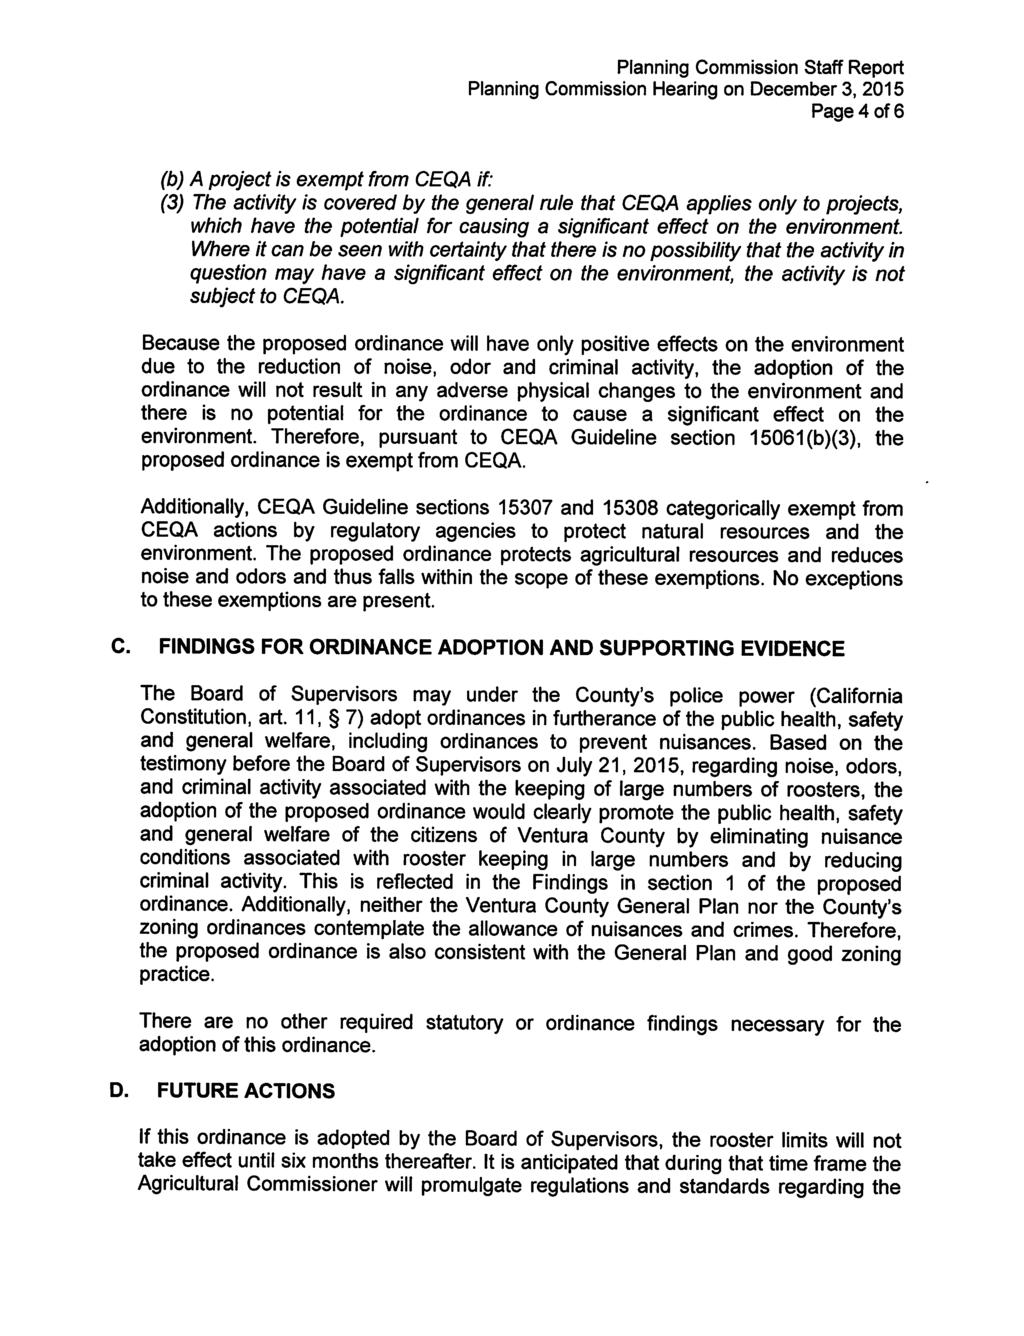 Planning Commission Staff Report Planning Commission Hearing on December 3, 2015 Page 4 of 6 (b) A project is exempt from CEQA if.